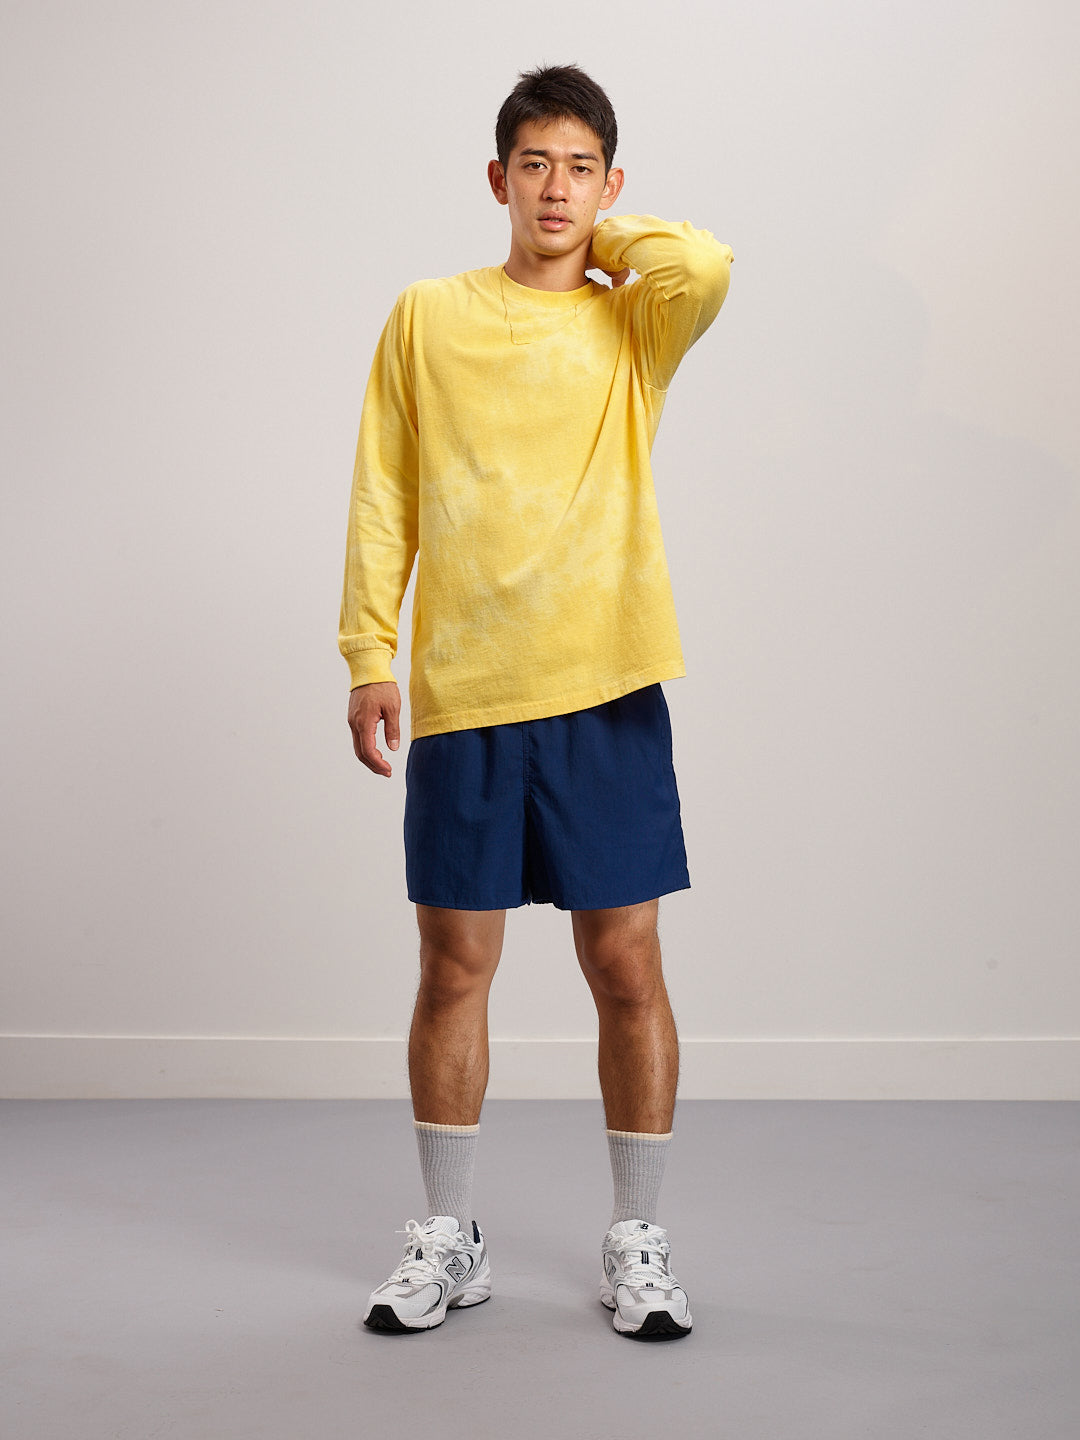 Long Sleeve Tee - Cloudy Washed Yellow